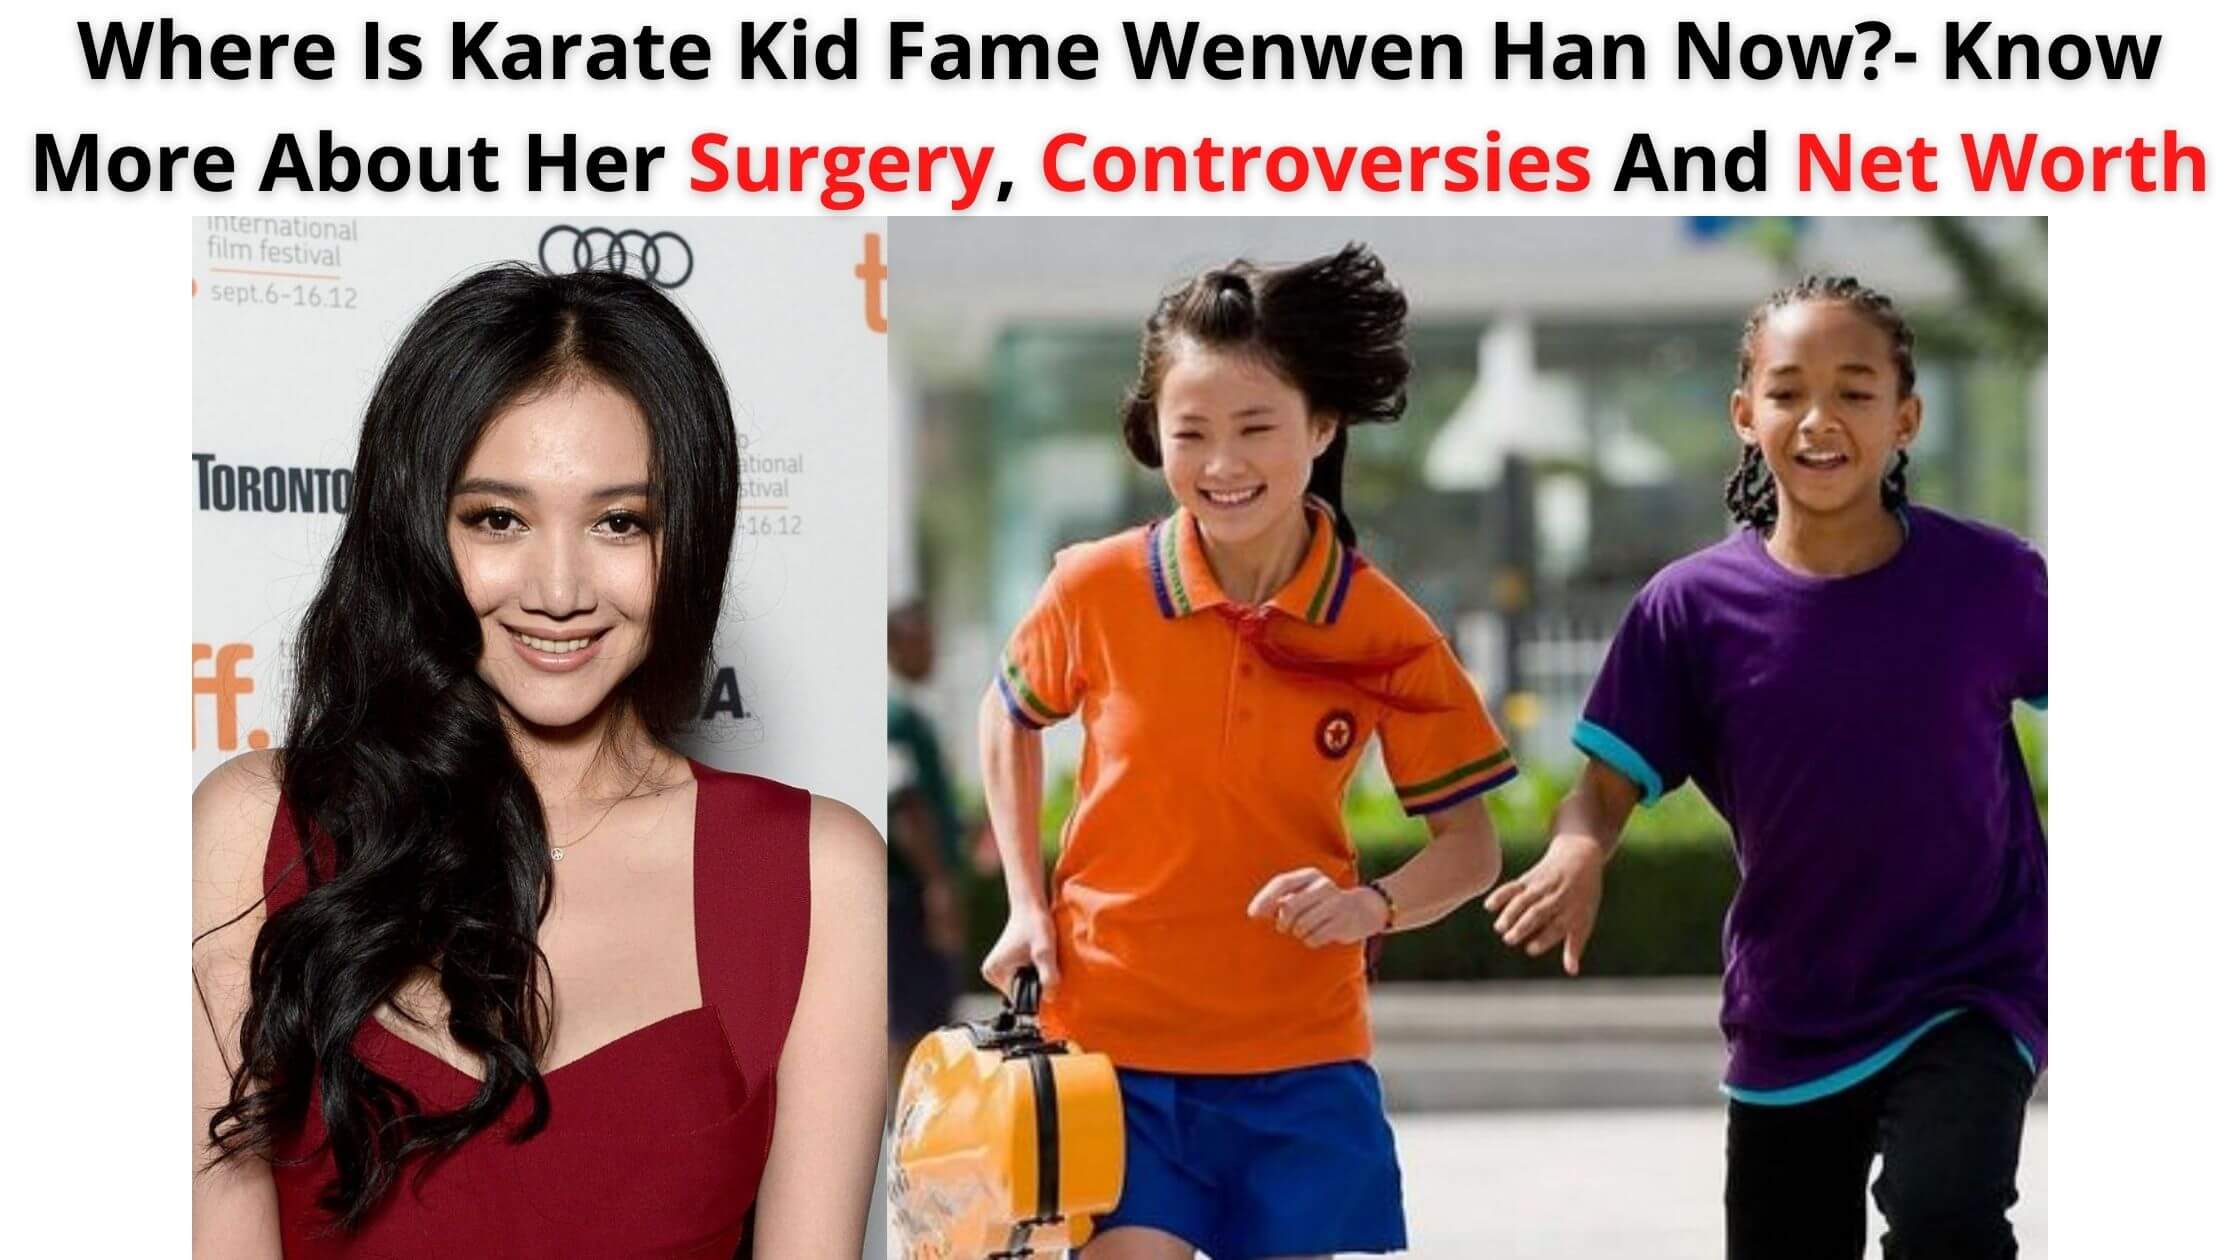 Where-Is-Wenwen-Han-Now-Know-More-About-Her-Surgery-Controversies-And-Net-Worth-1